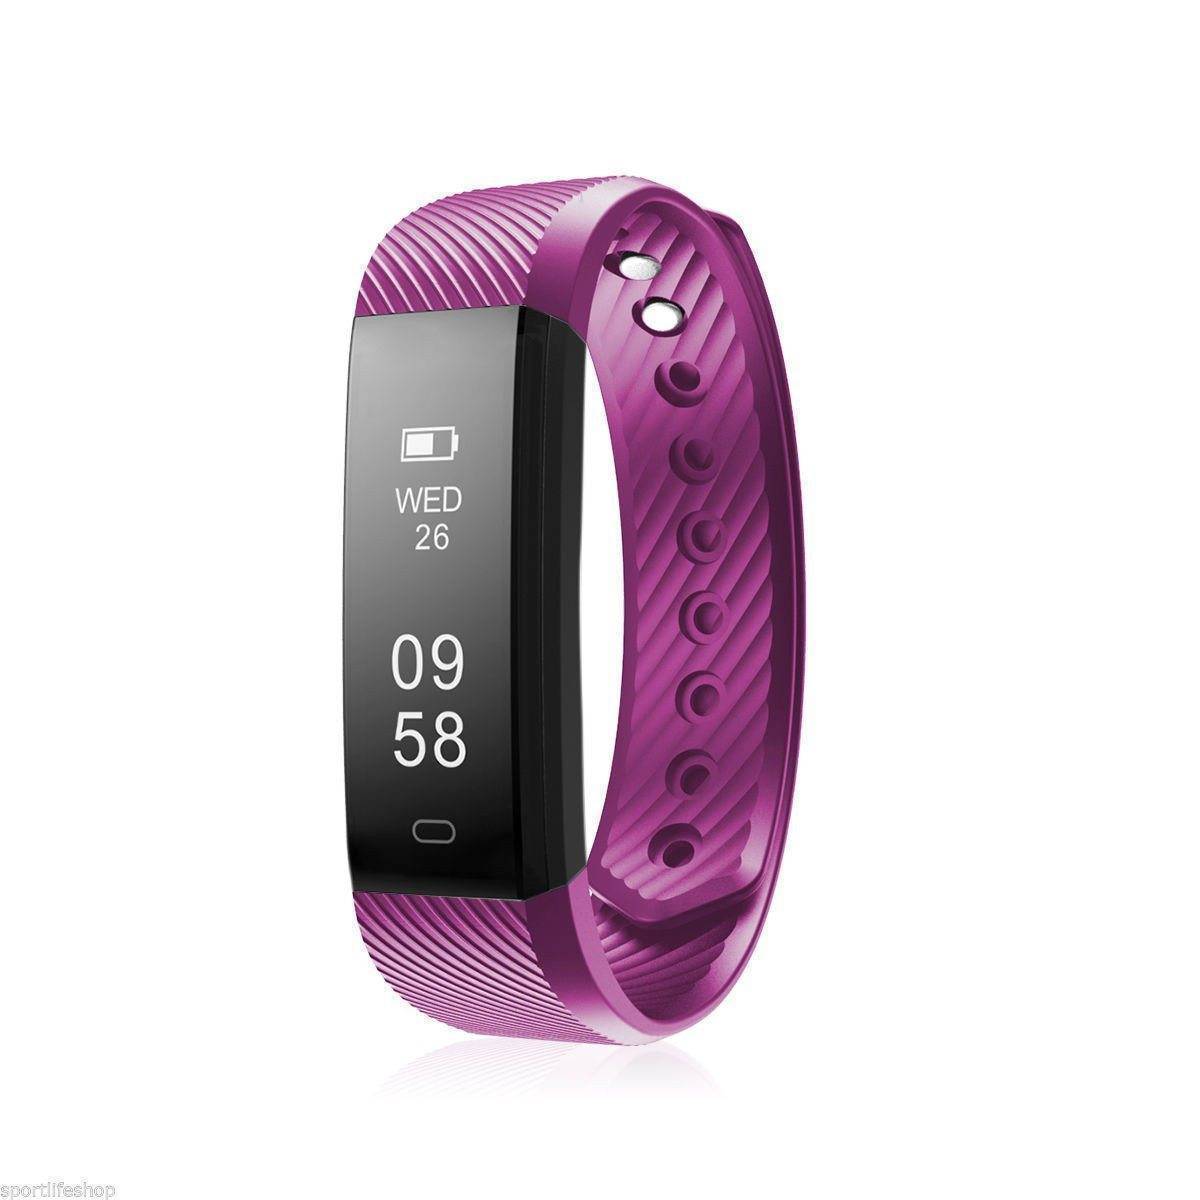 Bluetooth Smart Bracelet the Fitness Tracker Heart Rate Monitor